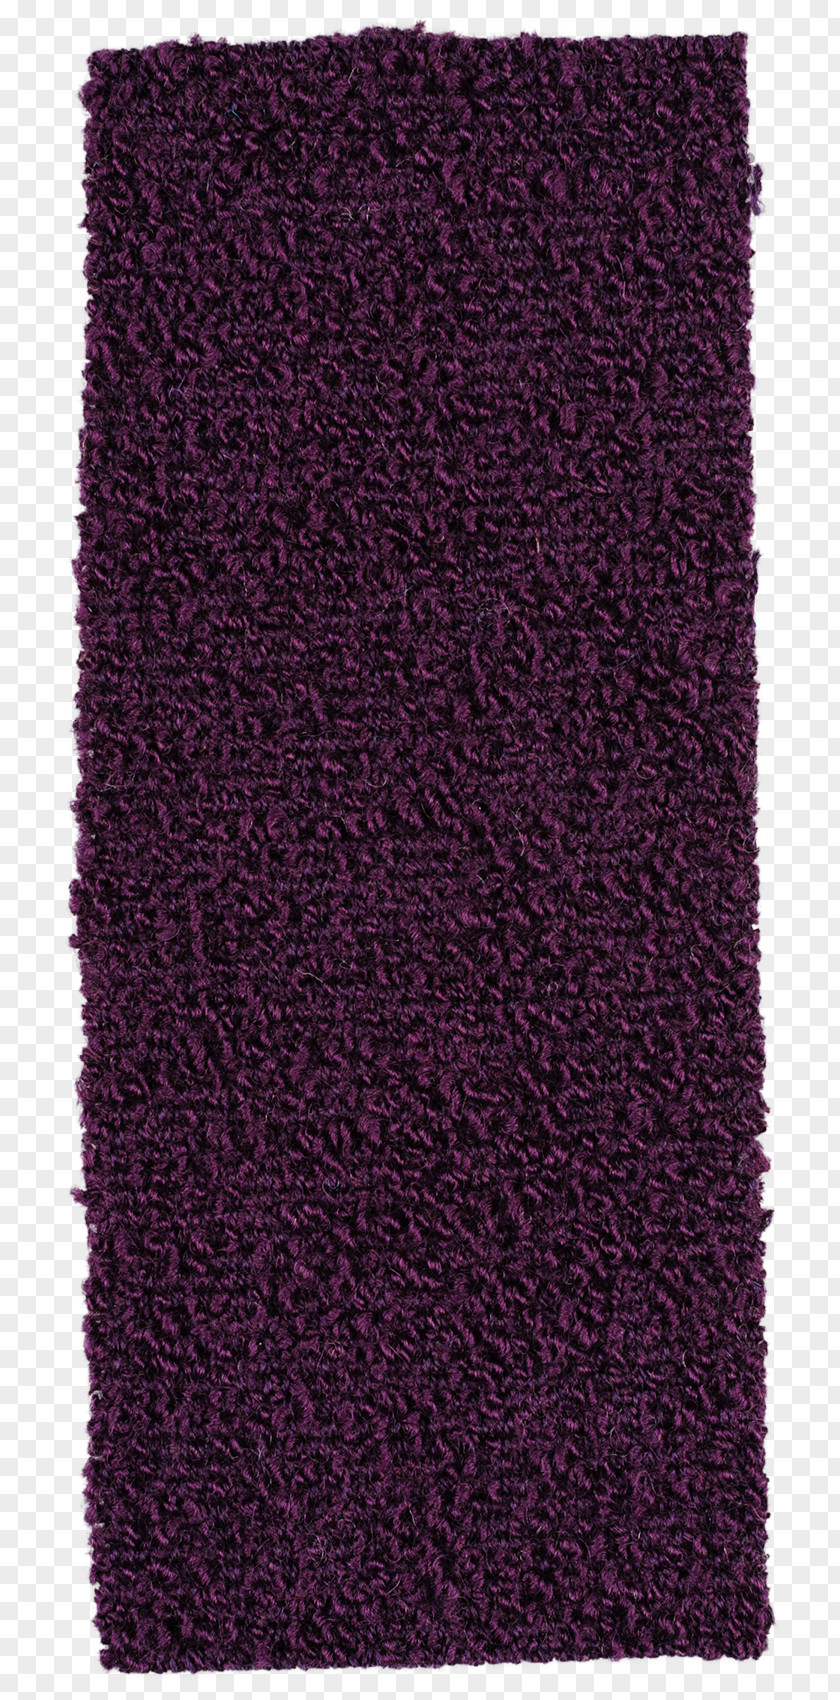 Mulberry Purple Magenta Violet Lilac Wool PNG